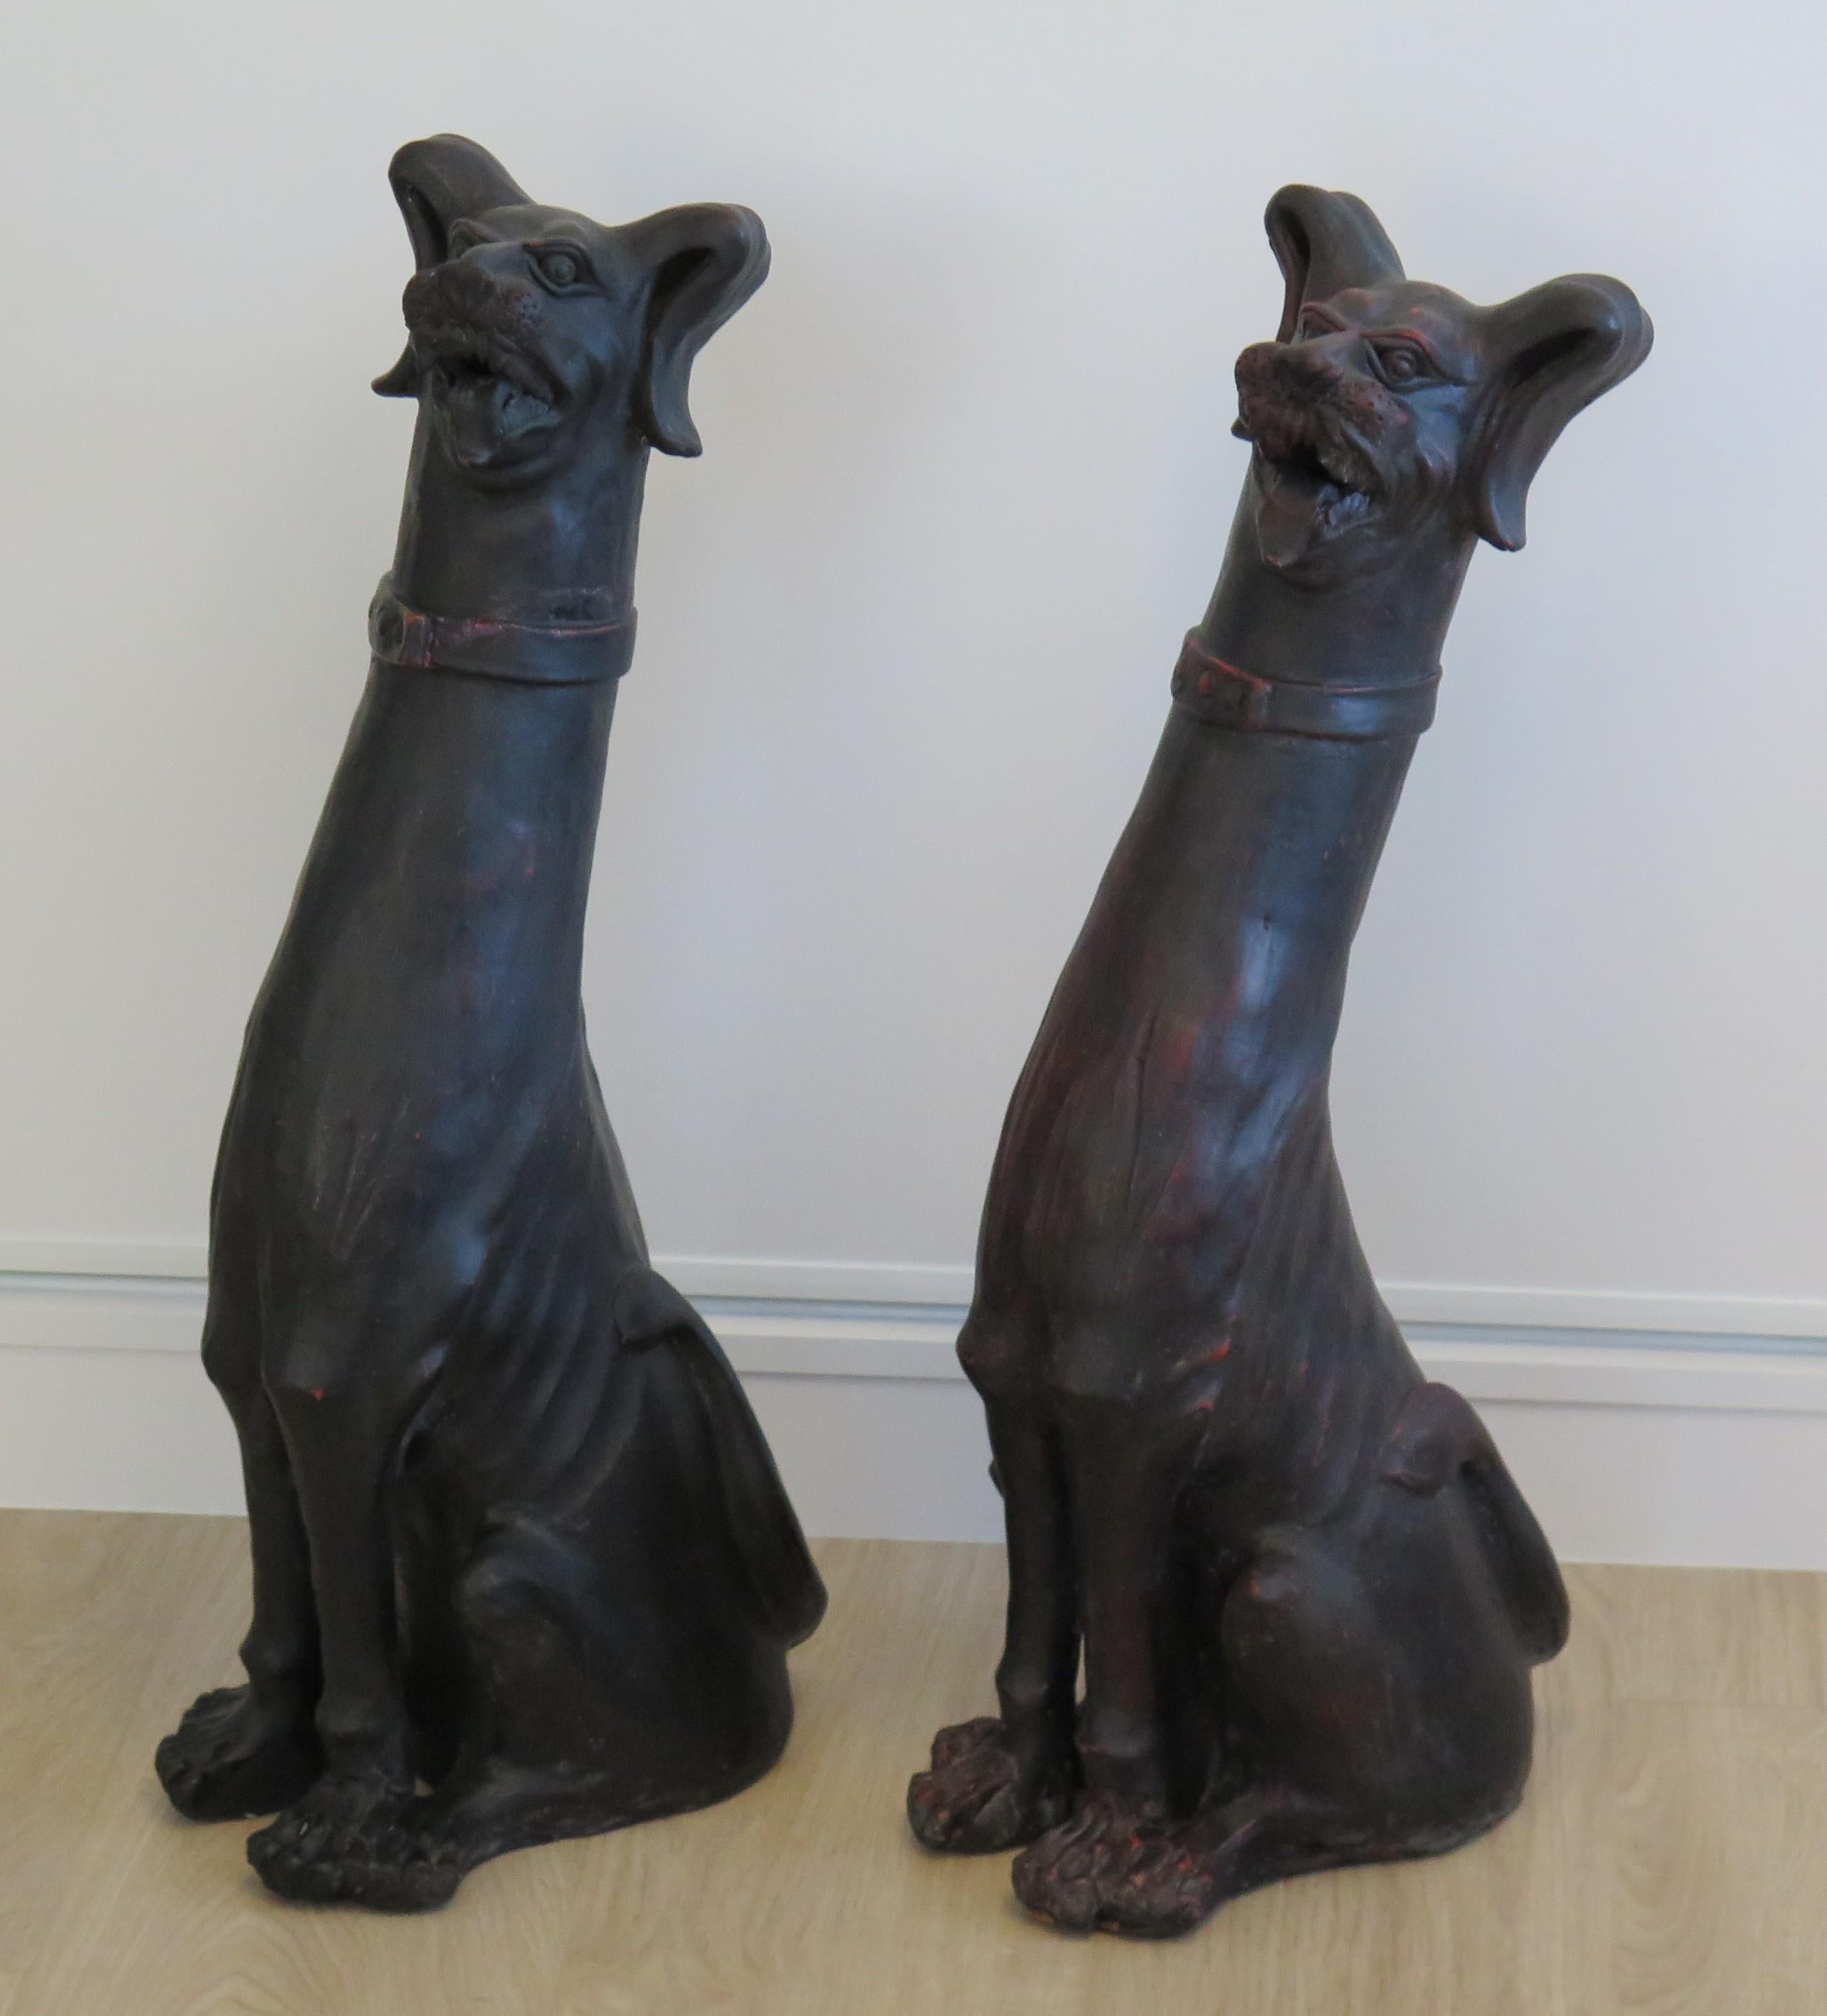 These are a large PAIR of antique earthenware (or terracotta) pottery Grotesque Dog sculptures, all hand made and dating to the 19th Century, probably made in Italy.

These life-size sculptures ( nearly 27 inches high) are quite different, being